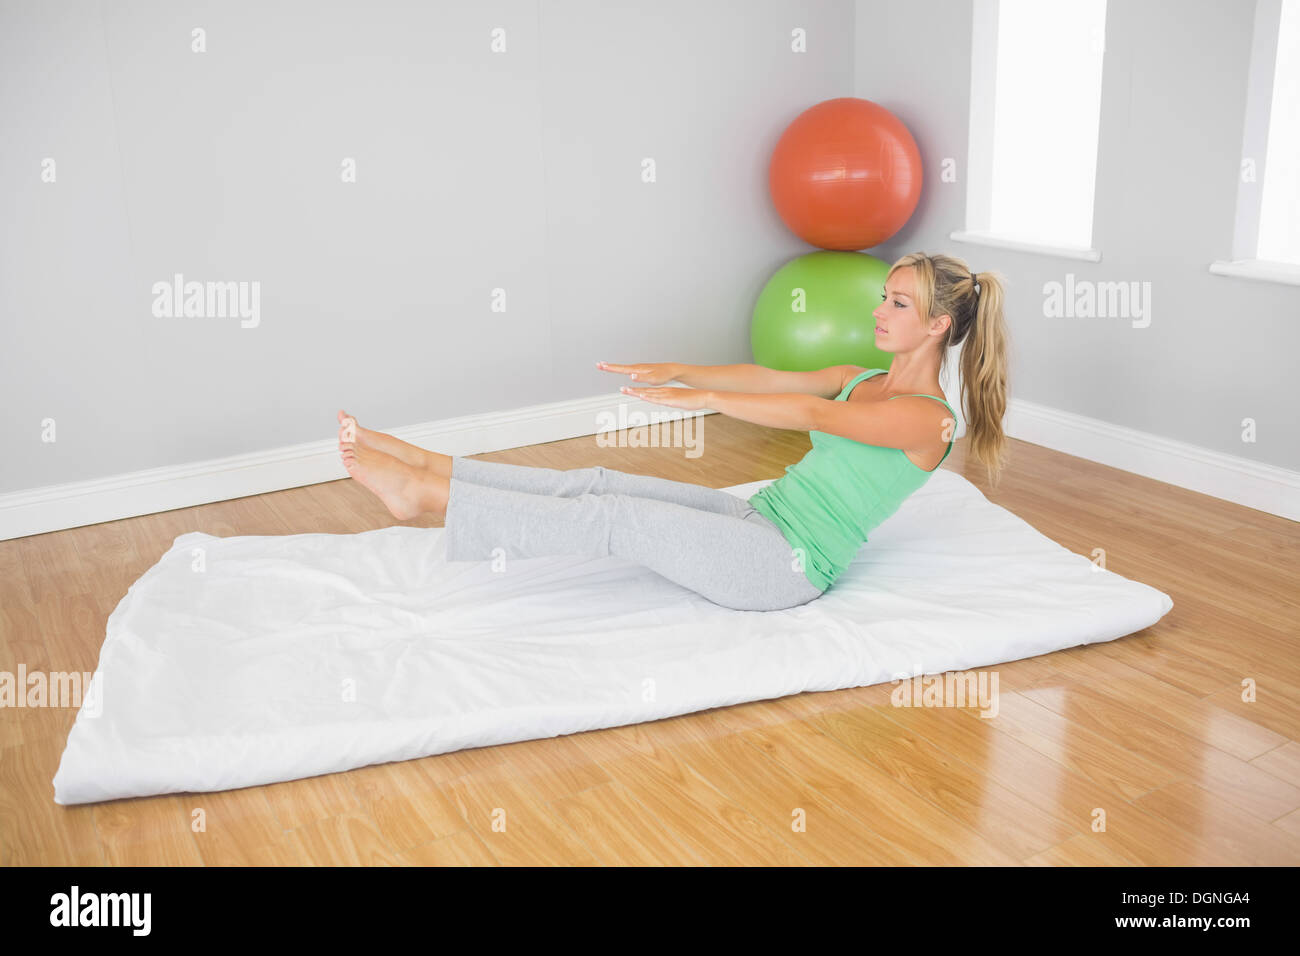 Blonde woman doing physical exercise Stock Photo